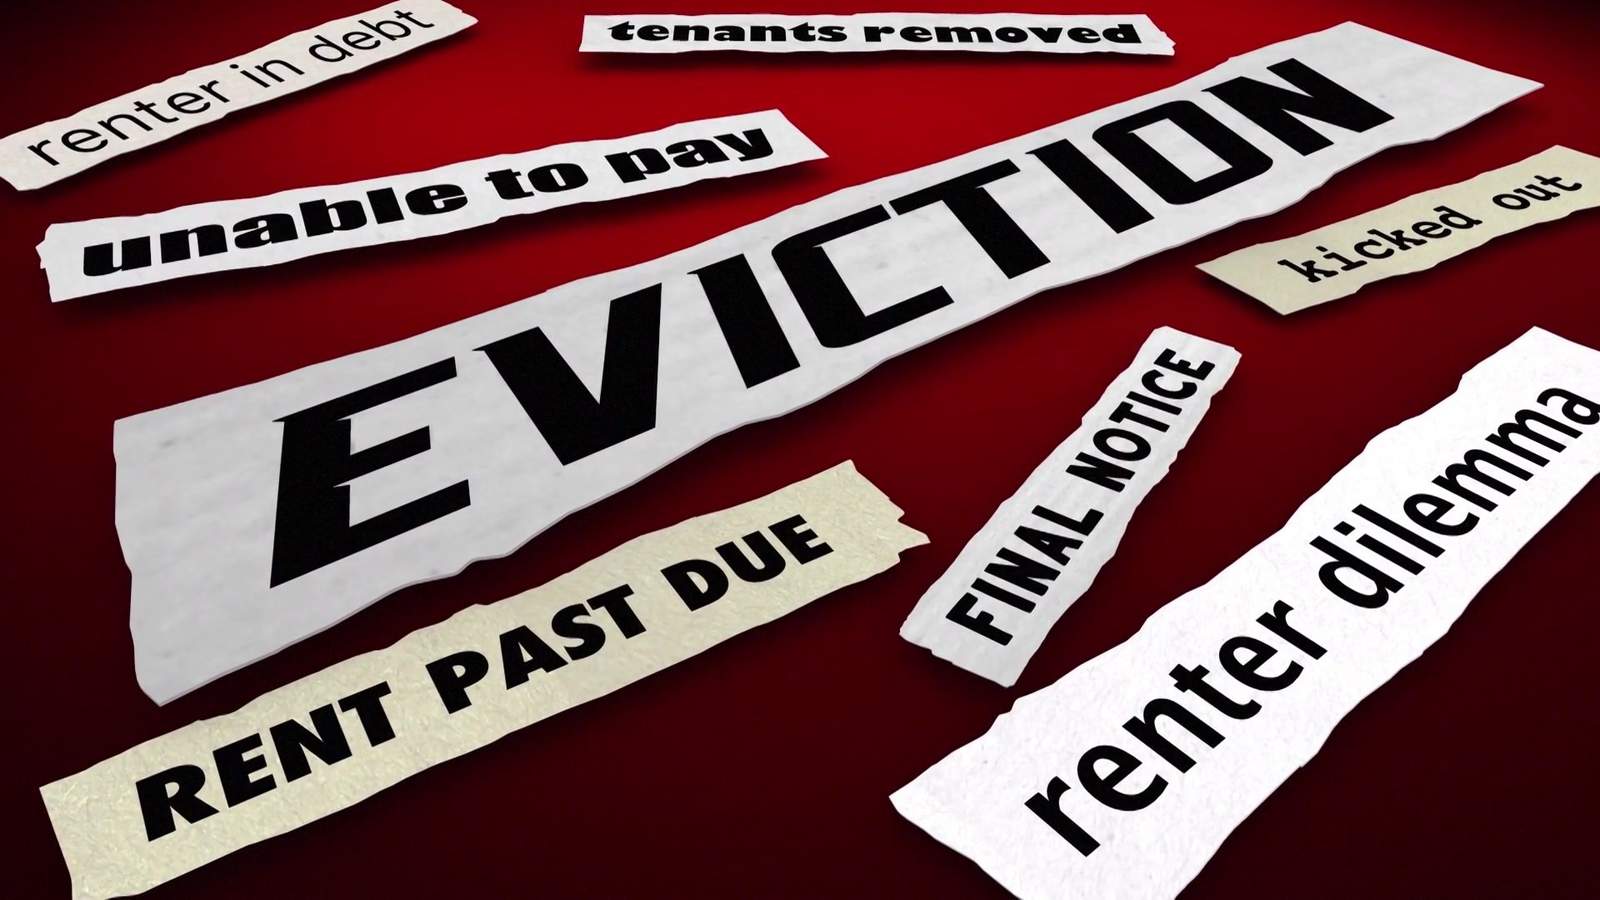 Houston-area renters facing eviction should check this website